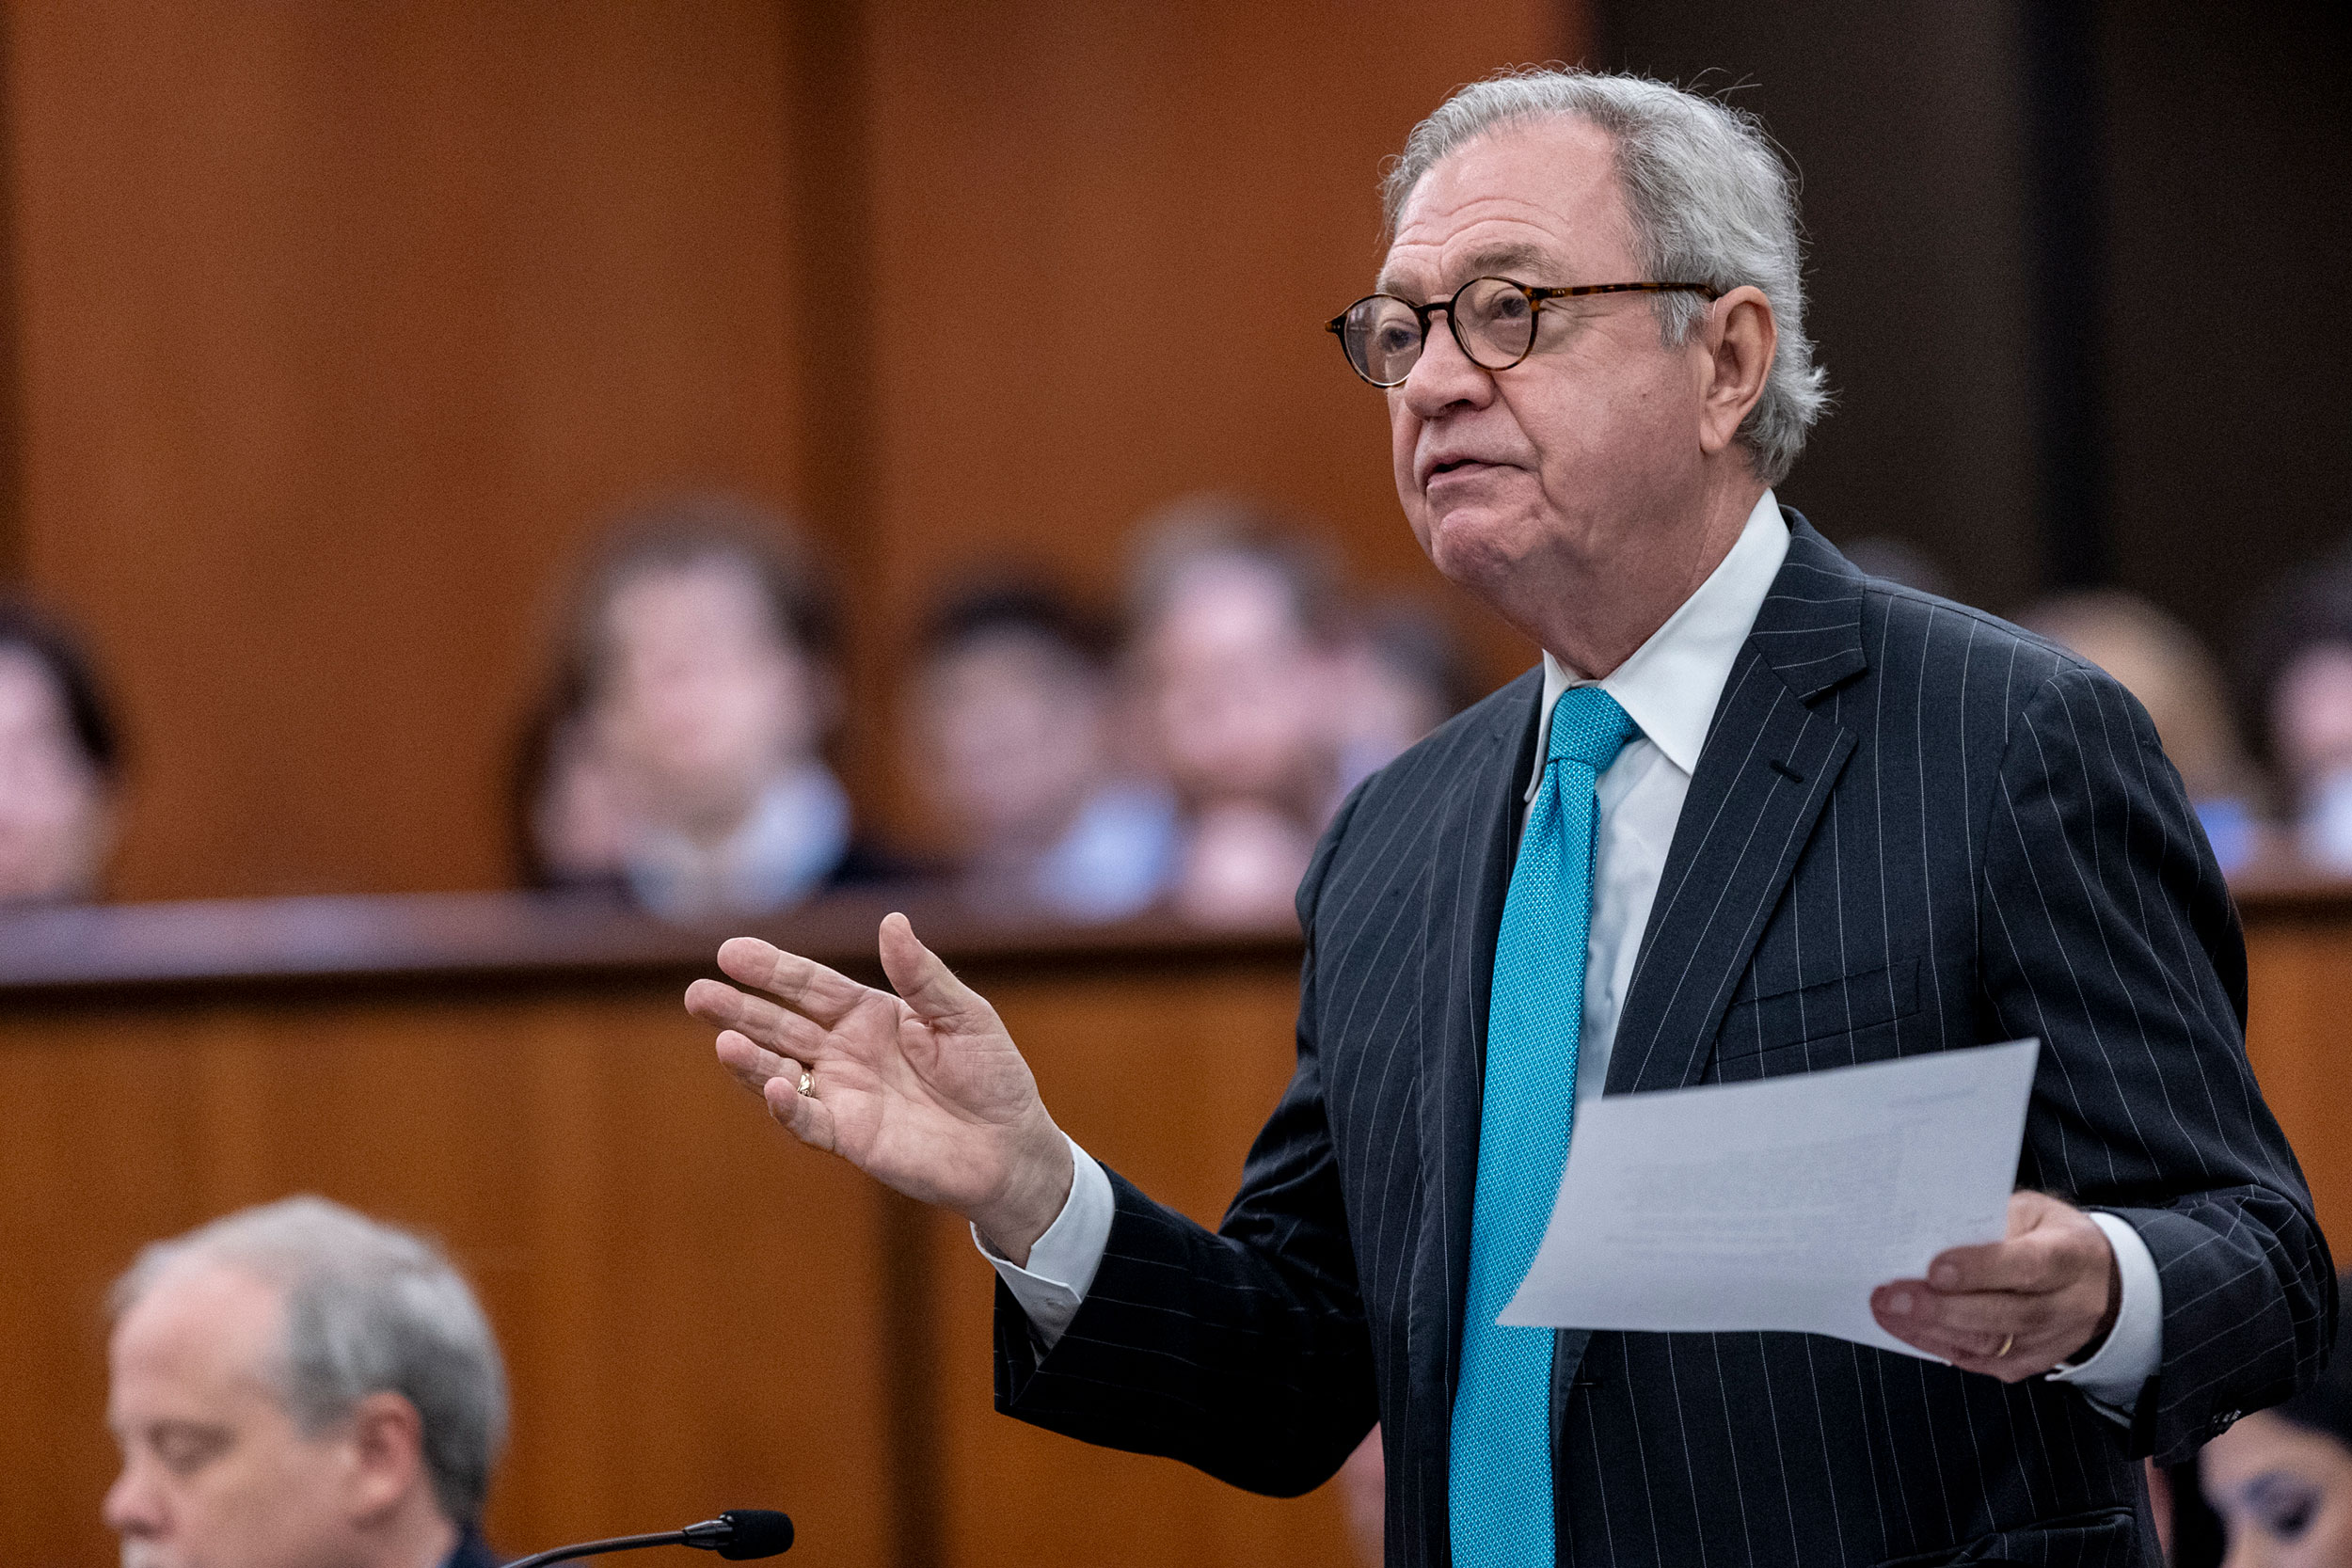 Defense attorney Dick Harpootlian speaks with Judge Jean Toal during a judicial hearing at the Richland County Judicial Center in Columbia, South Carolina, on Monday.